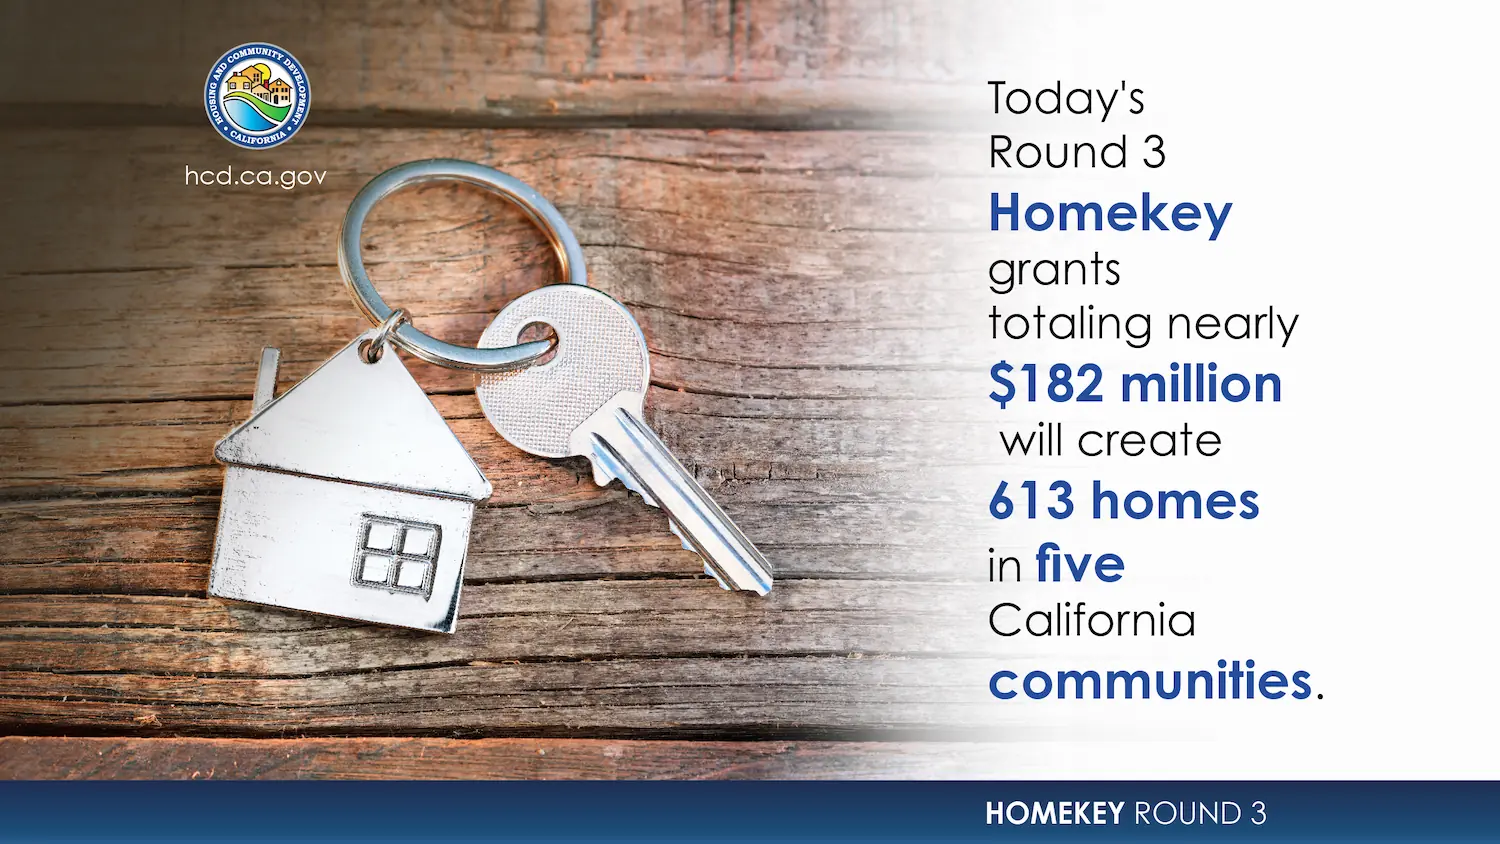 Photo of a key. Text reads, "Today's round 3 Homekey grants totaling nearly $182 million will create 613 homes in five California communities."